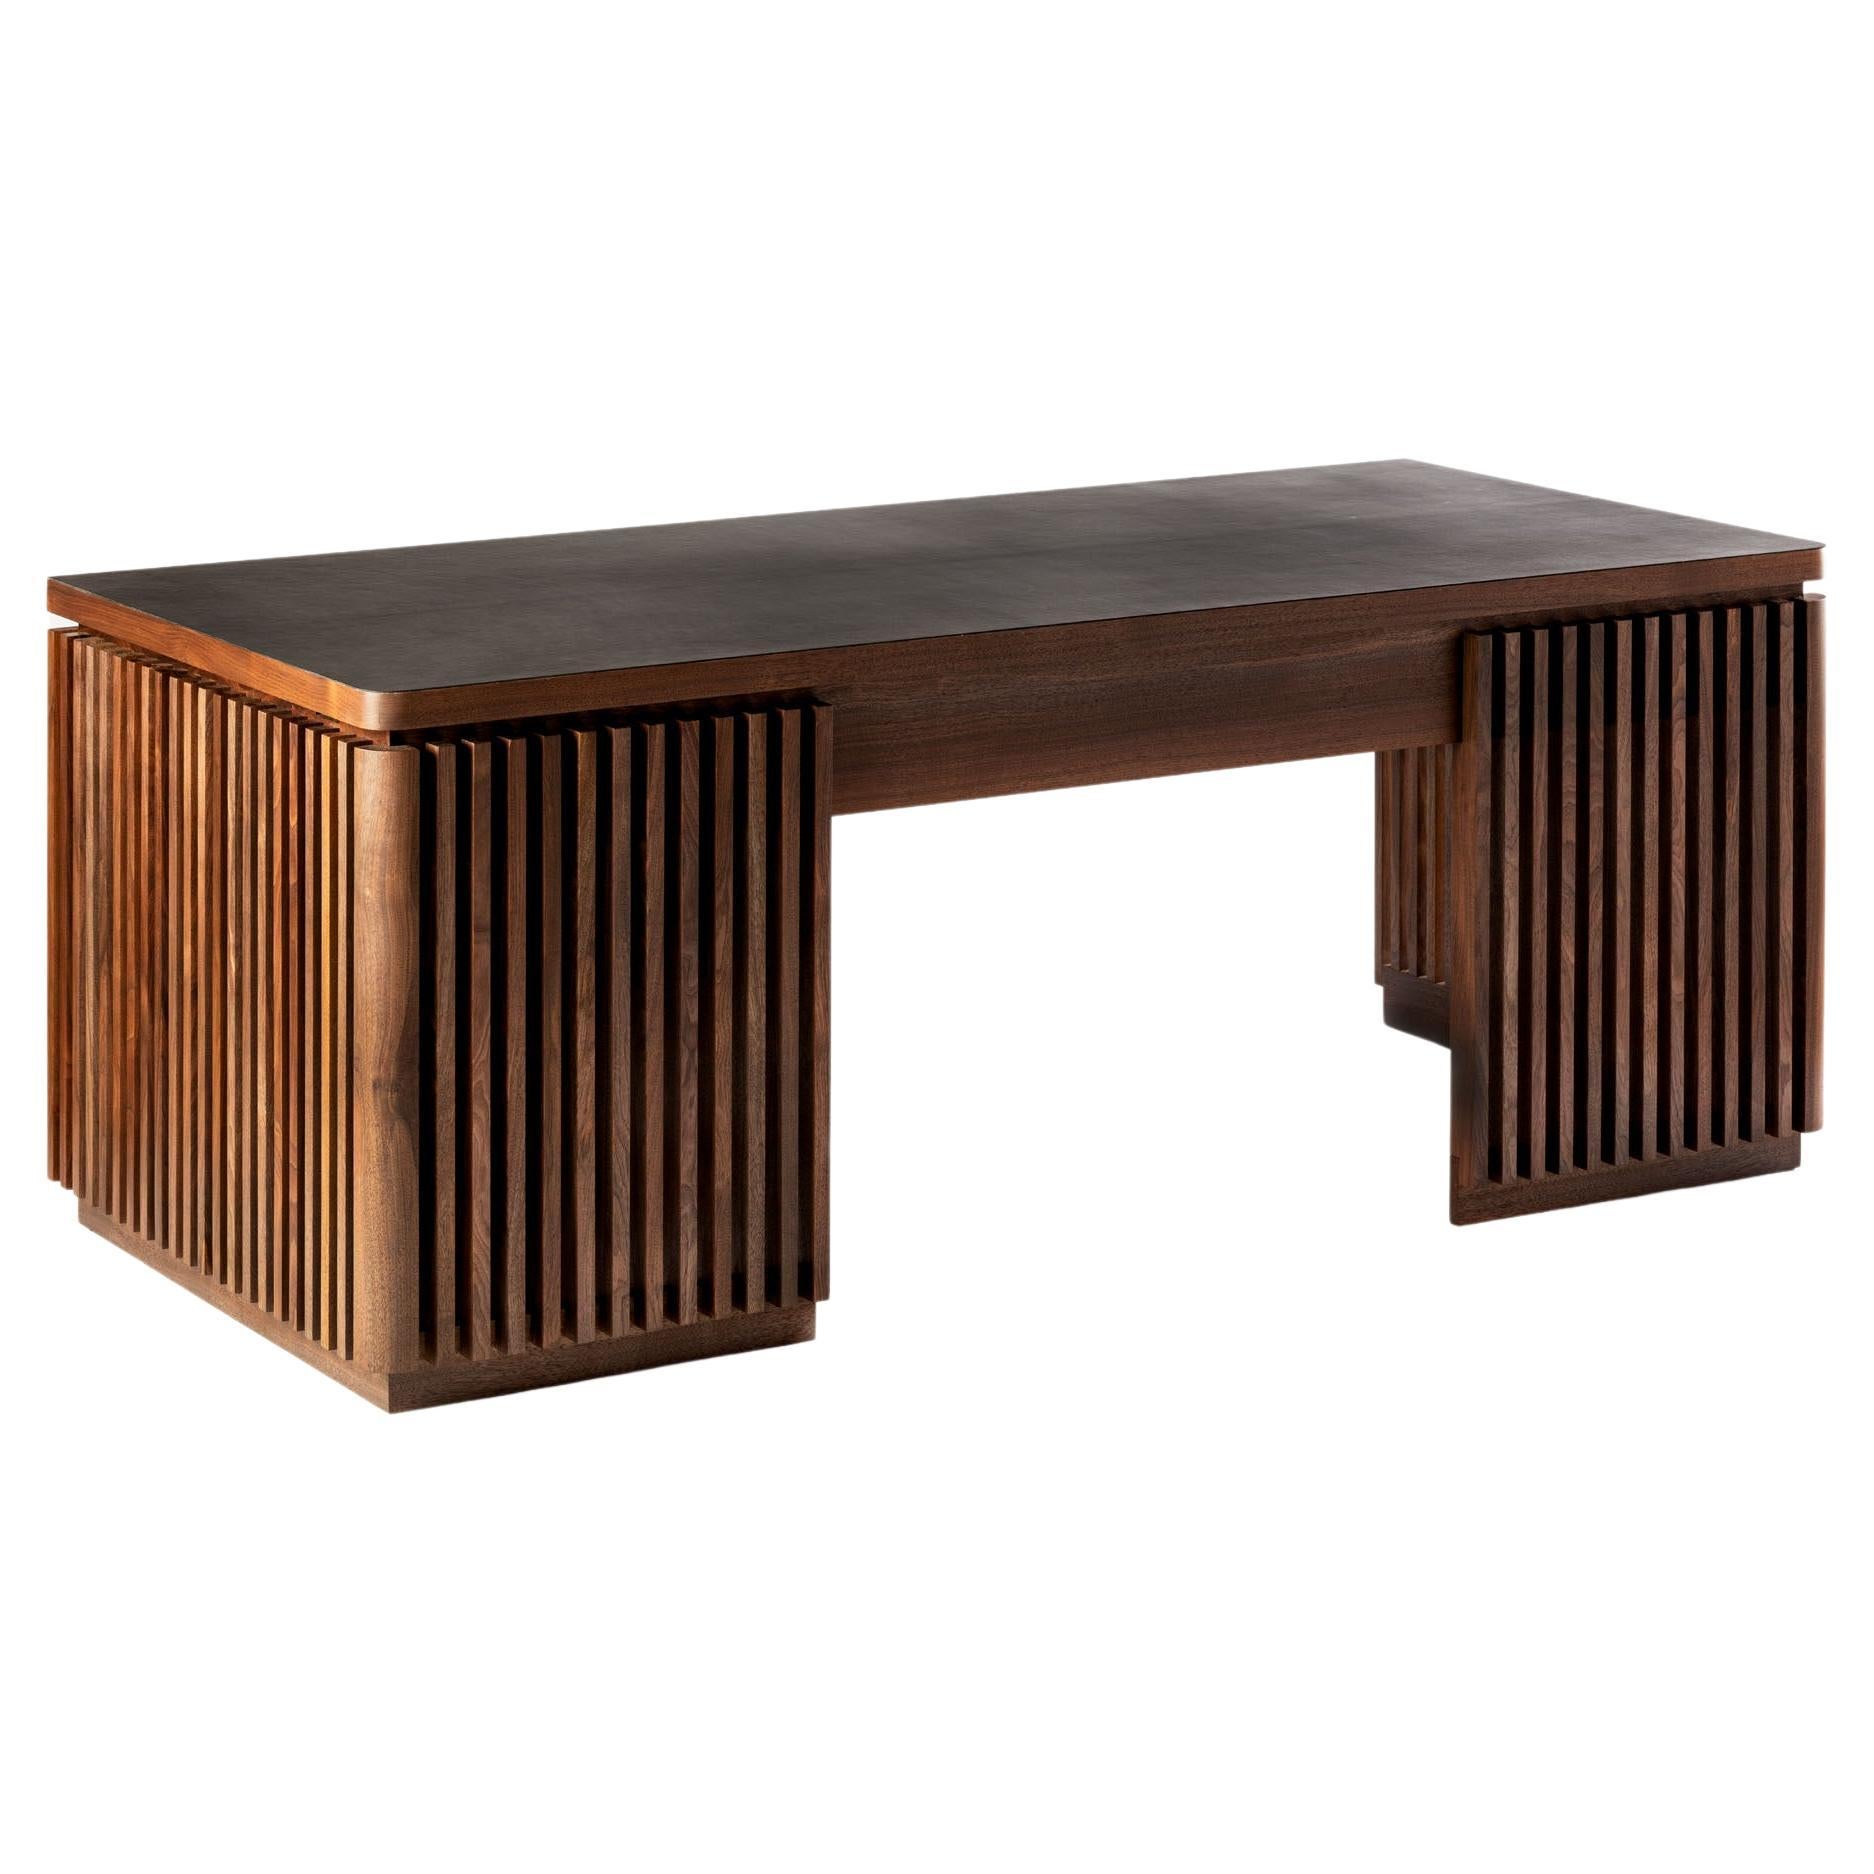 Contemporary, Solid Walnut and Black Leather, Handmade Ante Desk by Tim Vranken